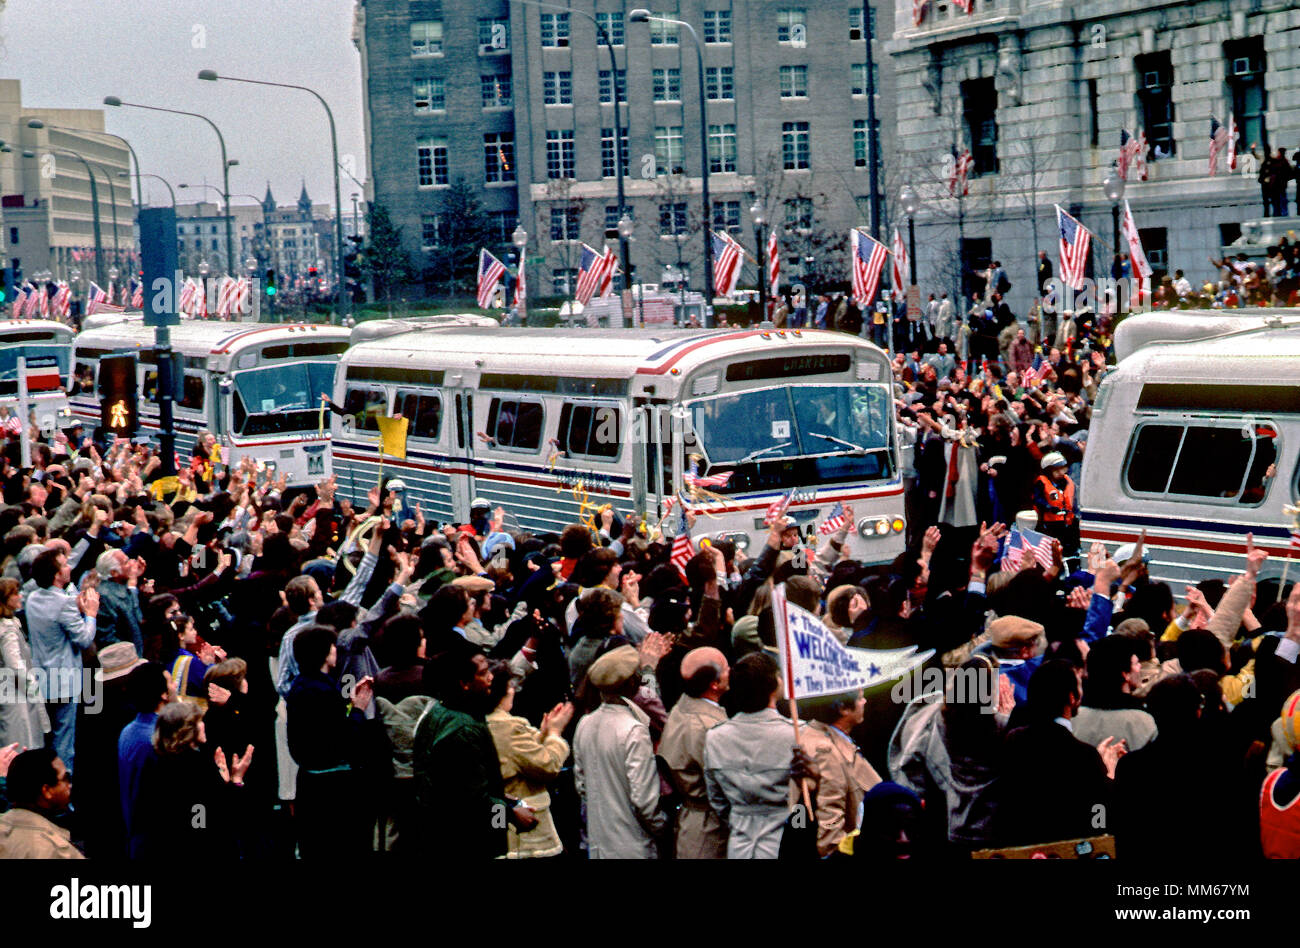 washington-dc-usa-january-27-1981-the-buses-carrying-the-52-americans-who-were-held-hostage-by-the-iranians-for-444-days-are-welcomed-home-by-a-massive-crowd-waving-symbolic-yellow-ribbons-along-pennsylvania-avenue-at-freedom-plaza-MM67YM.jpg